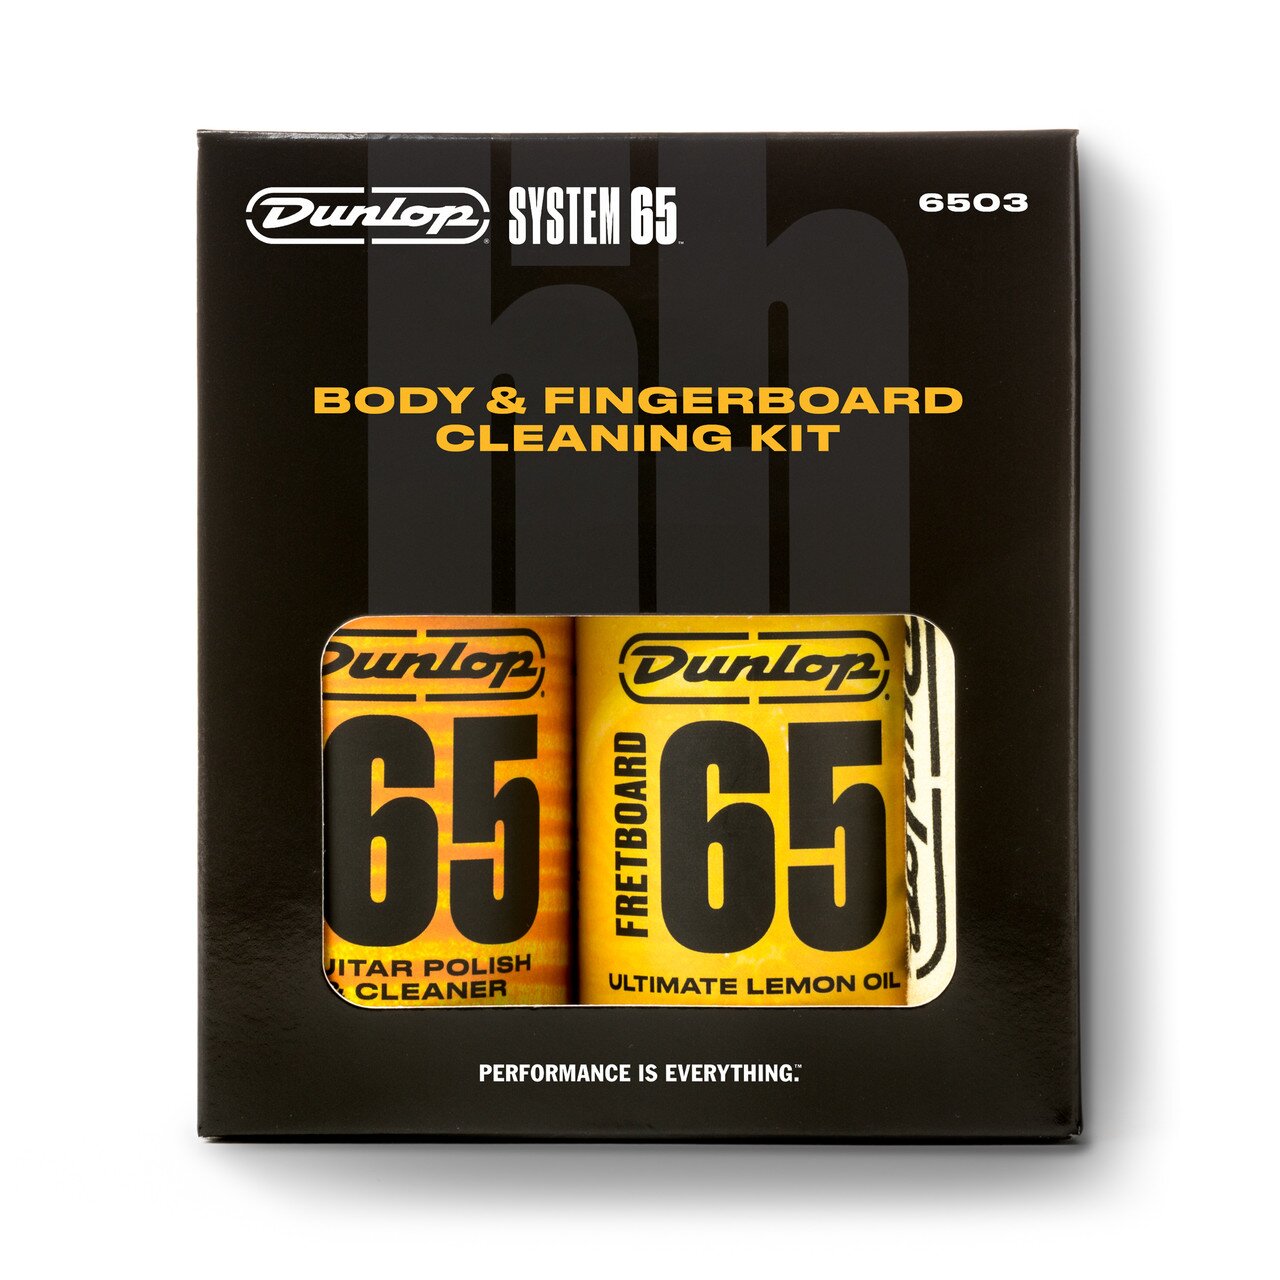 Dunlop 6503 Body & Fingerboard Cleaning Kit (box of 2 pieces with 2 cloths) : photo 1